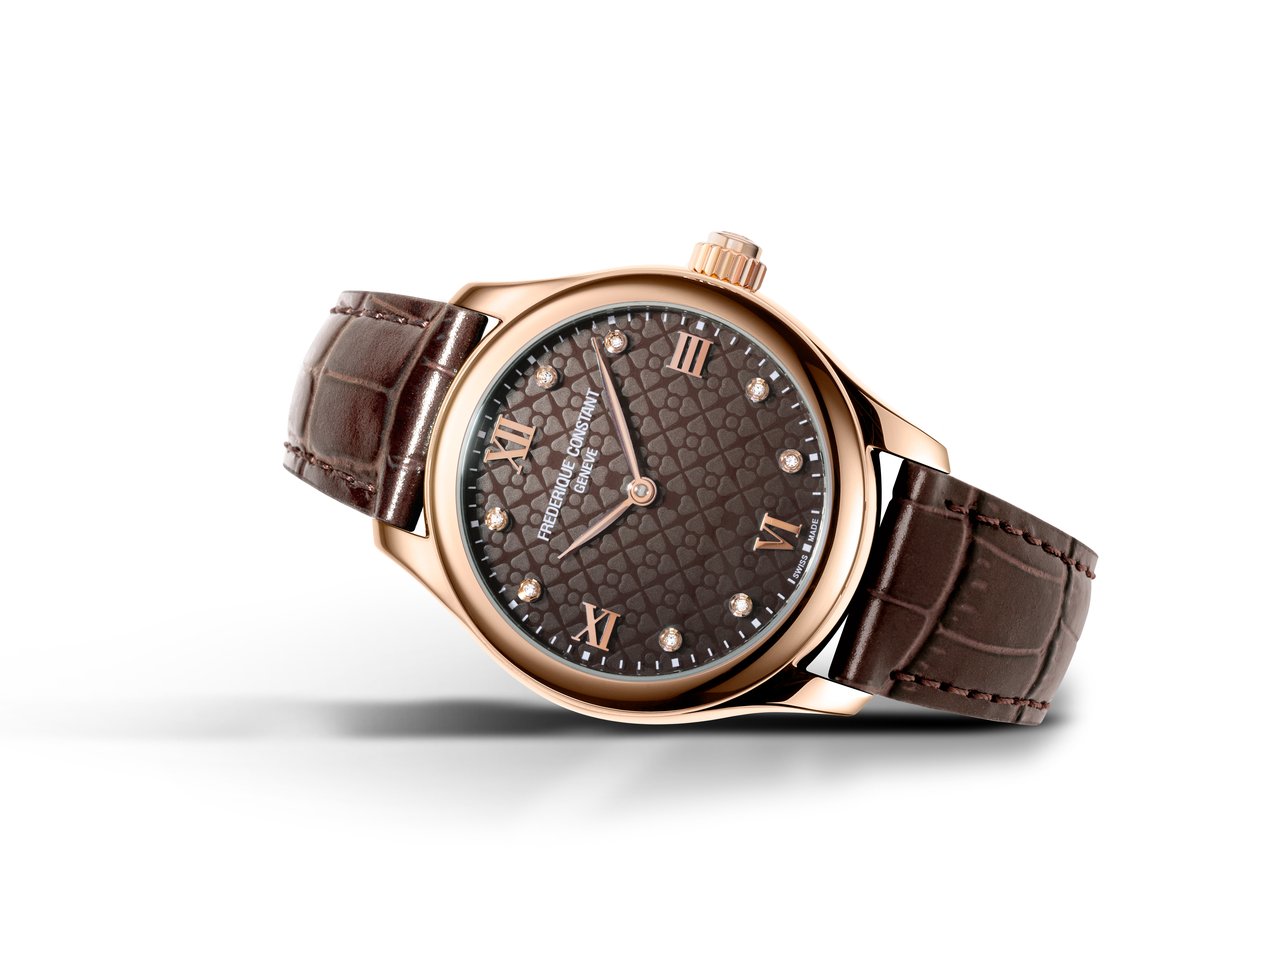 Frederique Constant Smartwatch Vitality - Watch I Love